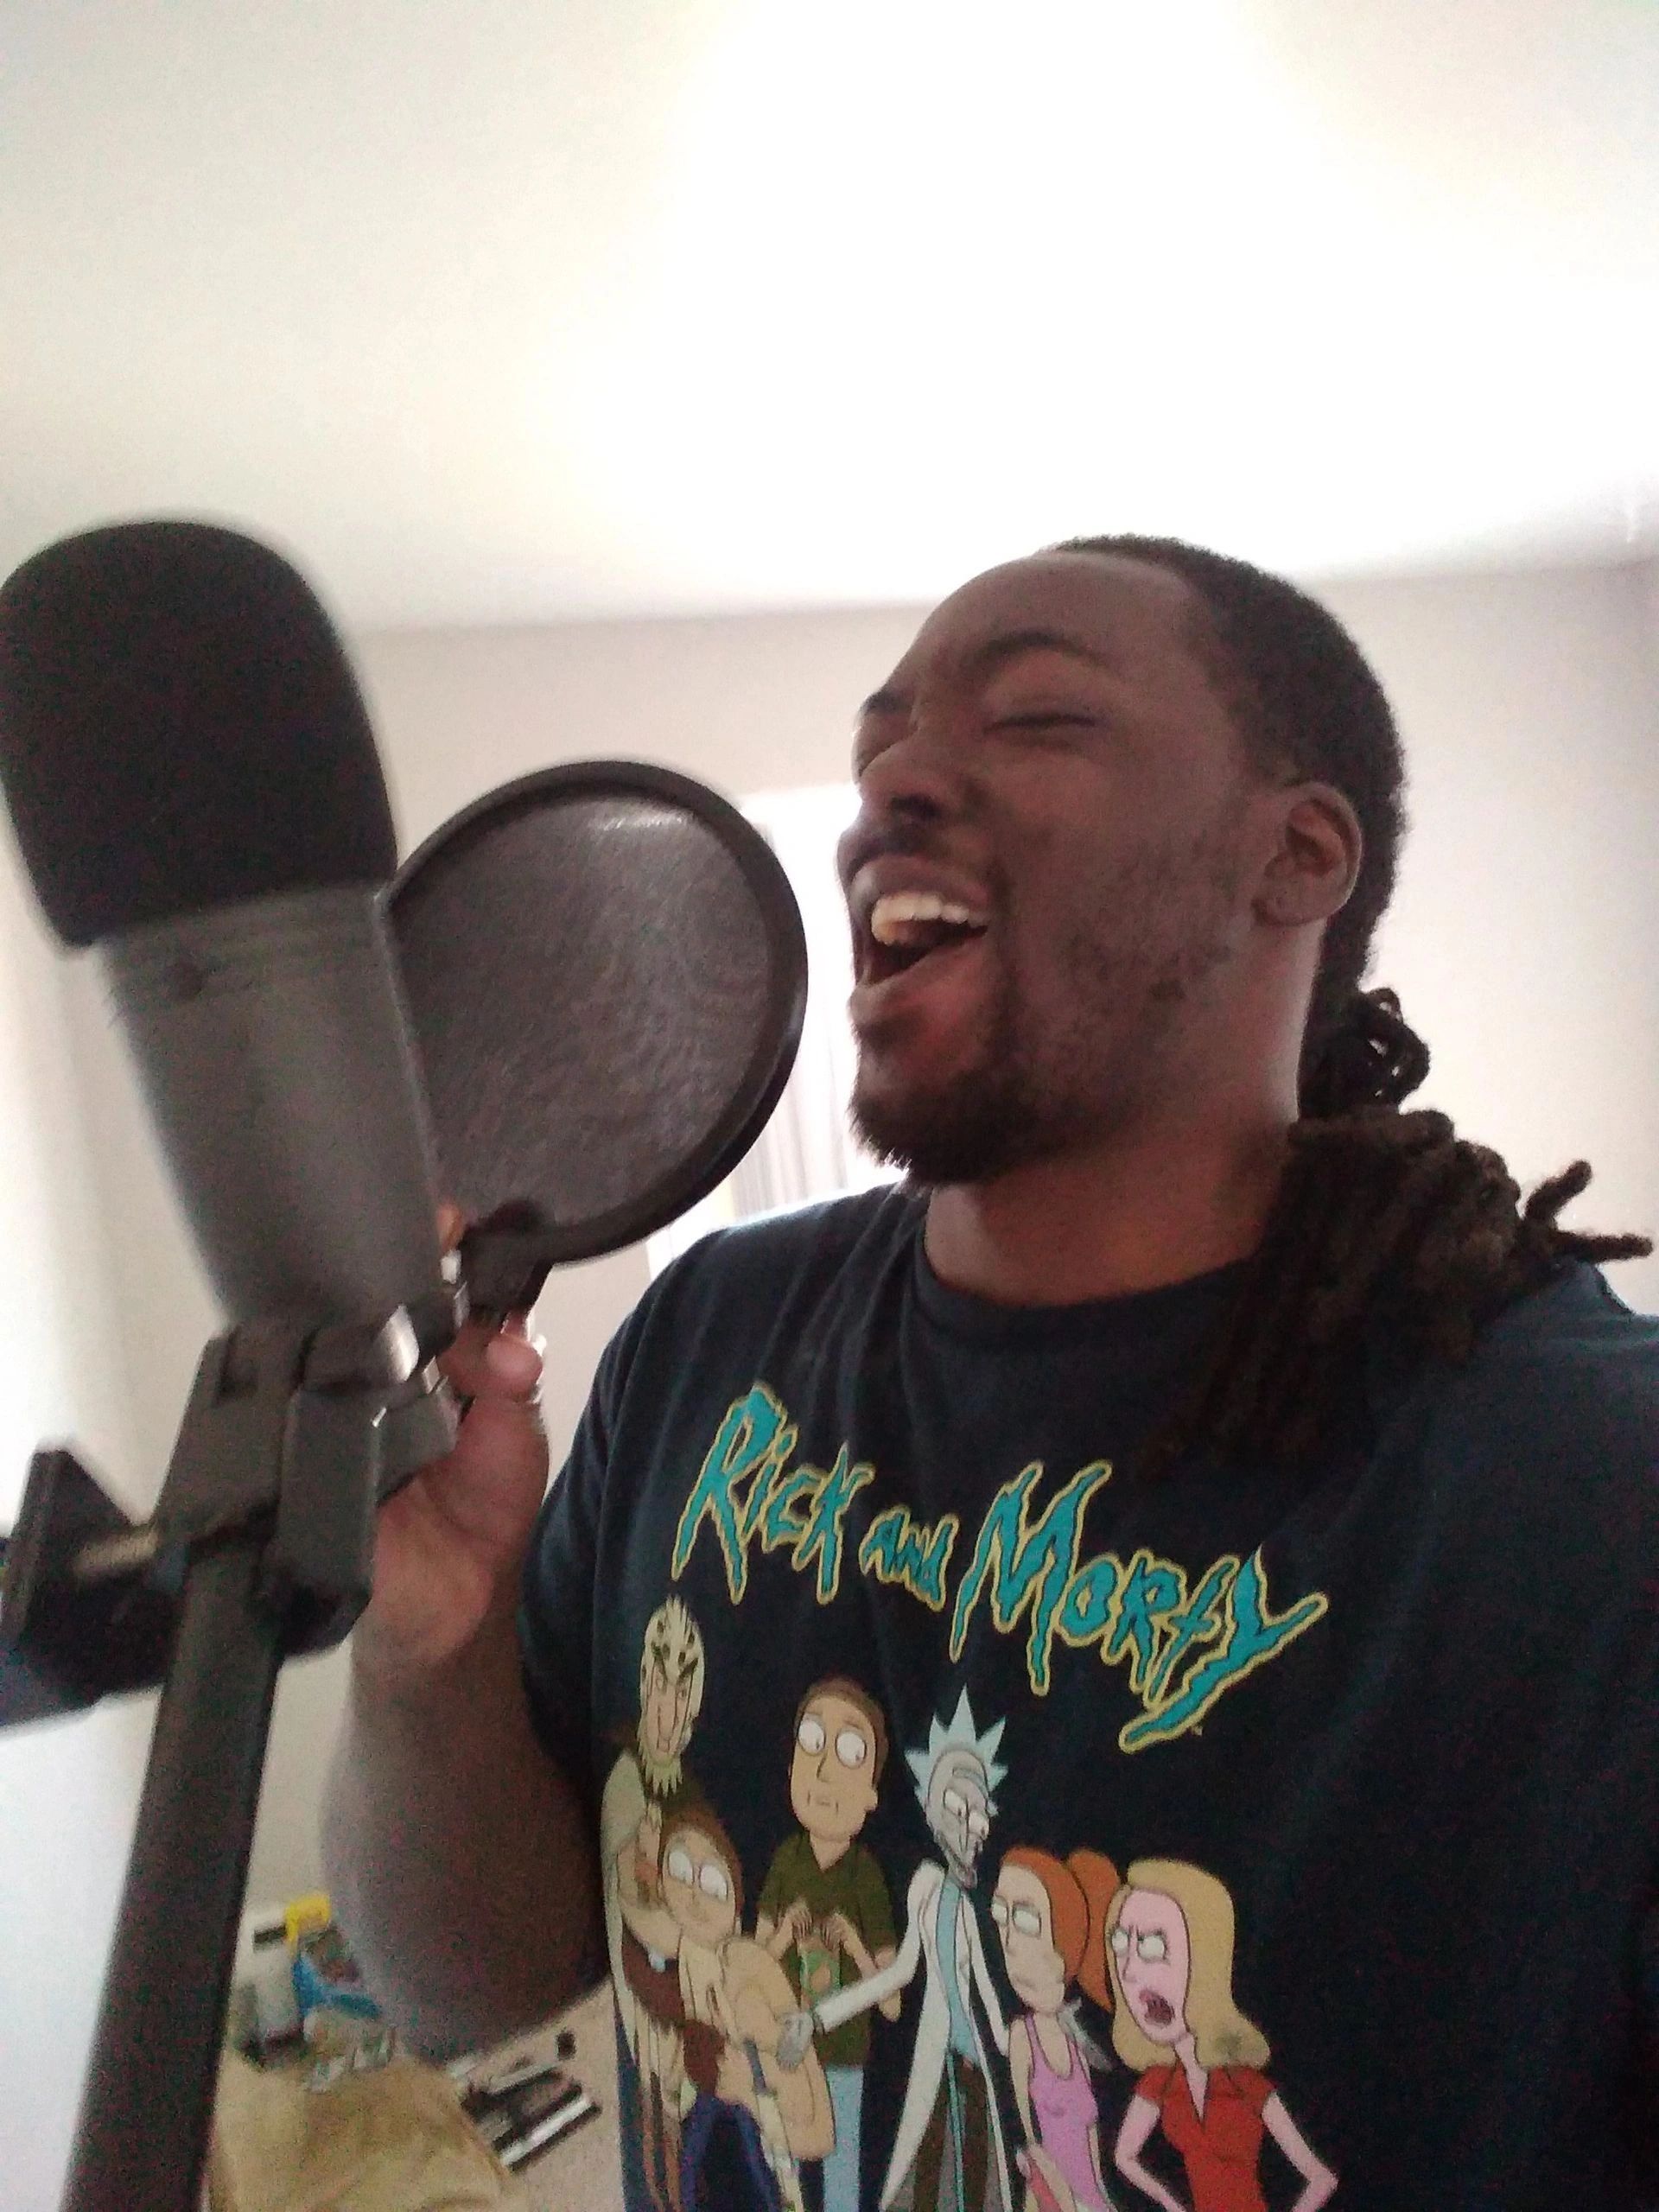 The musician DopeAMean is Rapping Lyrics On The Microphone, at his home studio in Aurora, Colorado.